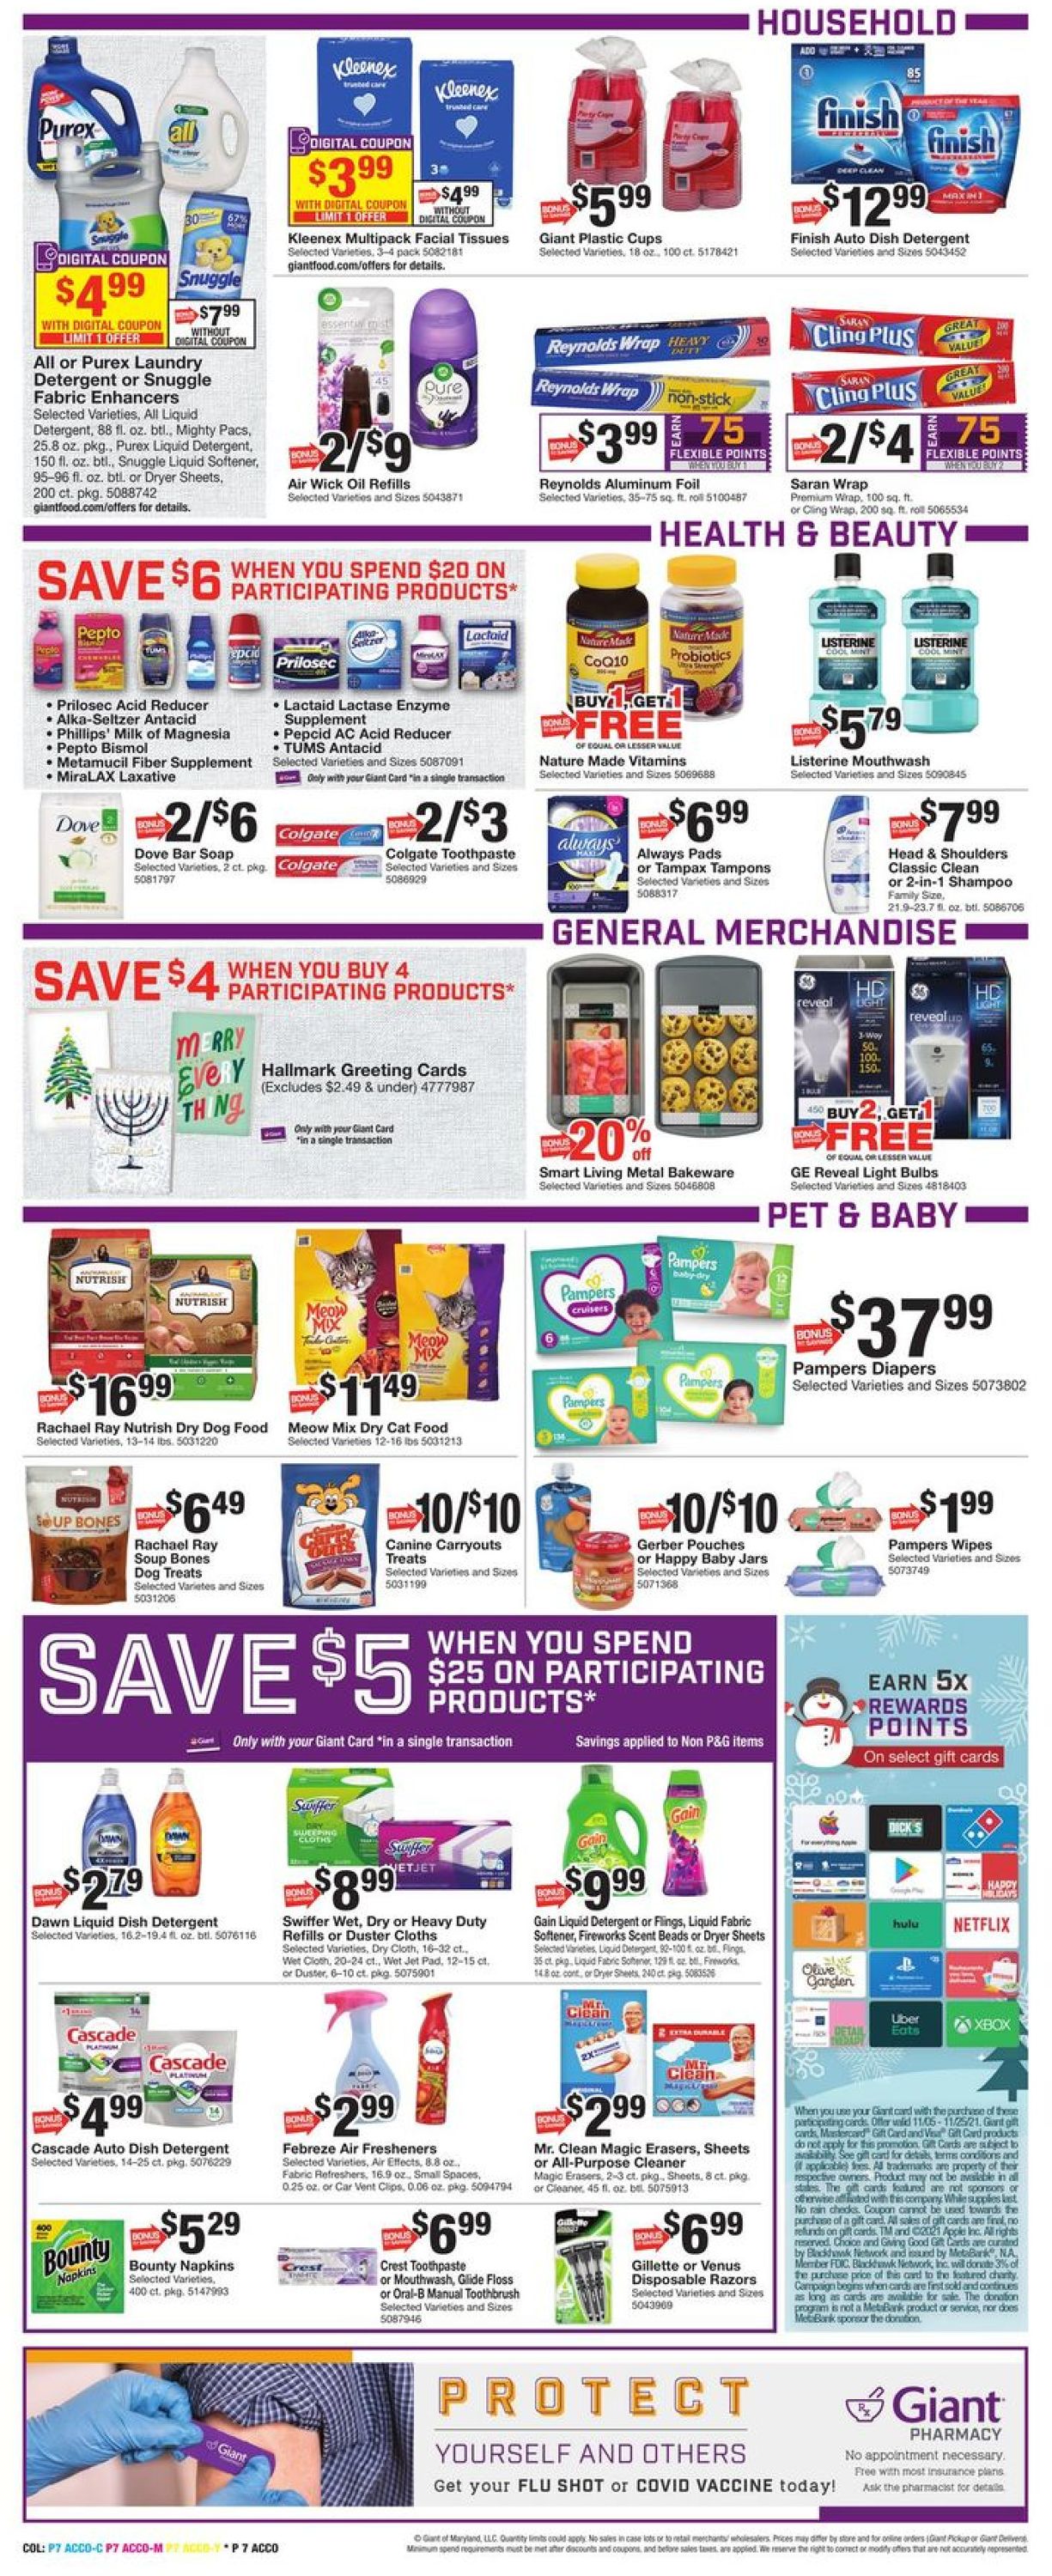 Giant Food THANKSGIVING 2021 Weekly Ad Circular - valid 11/19-11/25/2021 (Page 9)